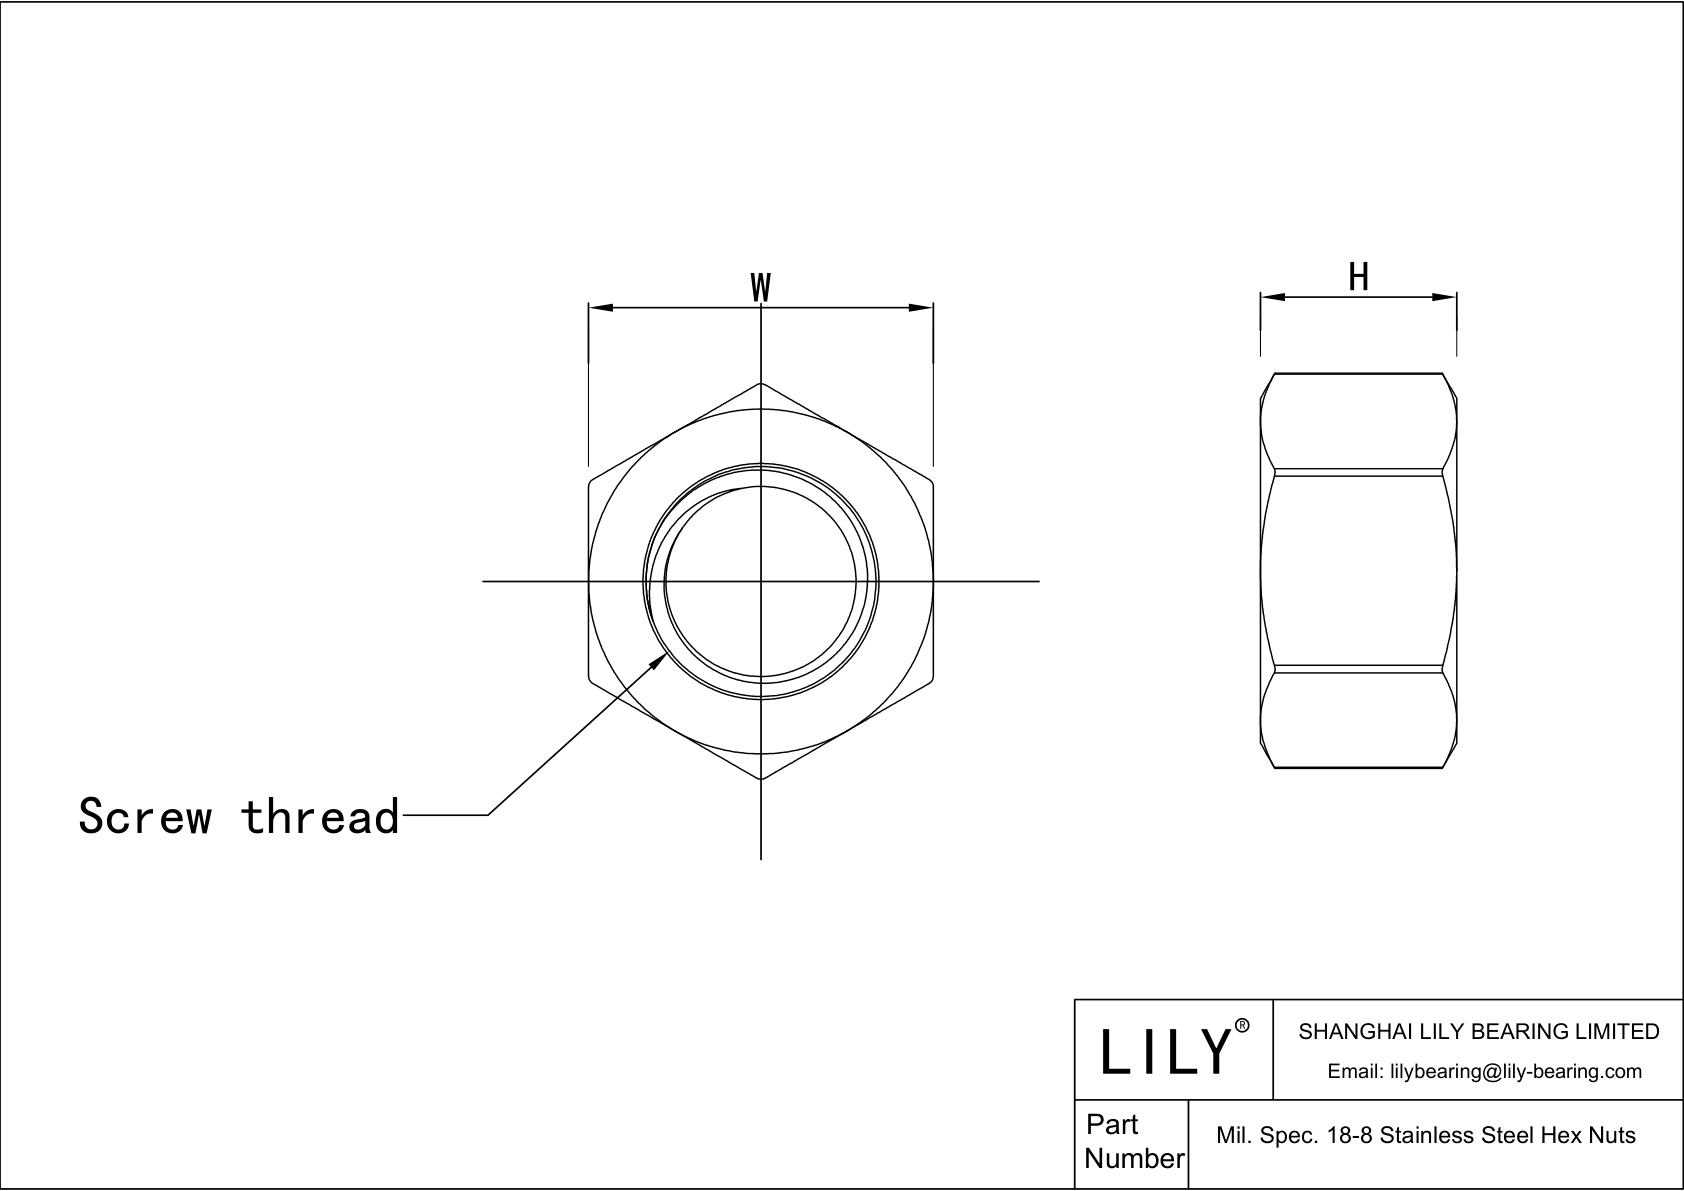 JAHGCABCH Mil. Spec. 18-8 Stainless Steel Hex Nuts cad drawing